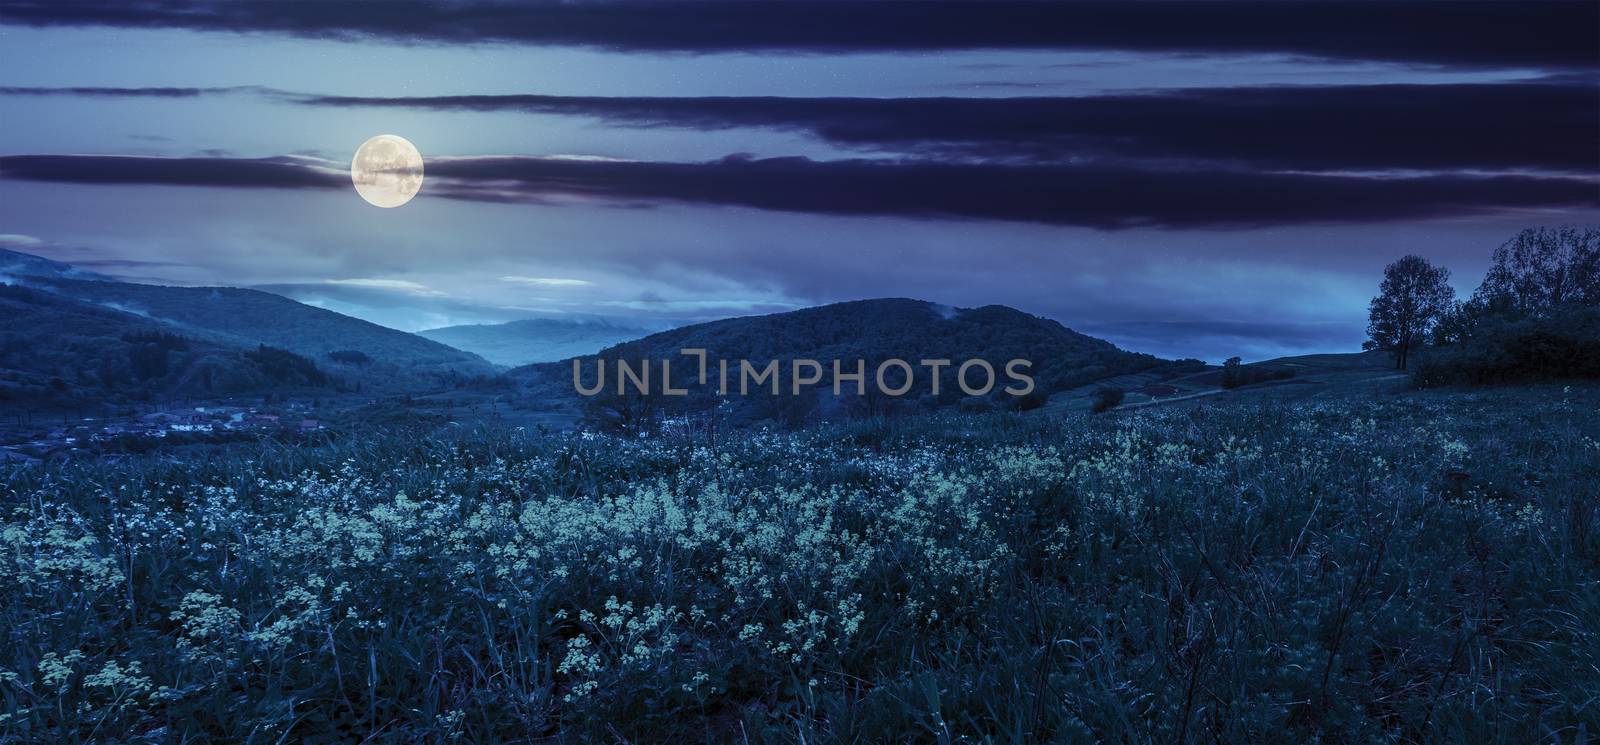 panoramic mountain summer landscape. yellow flowers on hillside meadow near village in mountains at night in full moon light